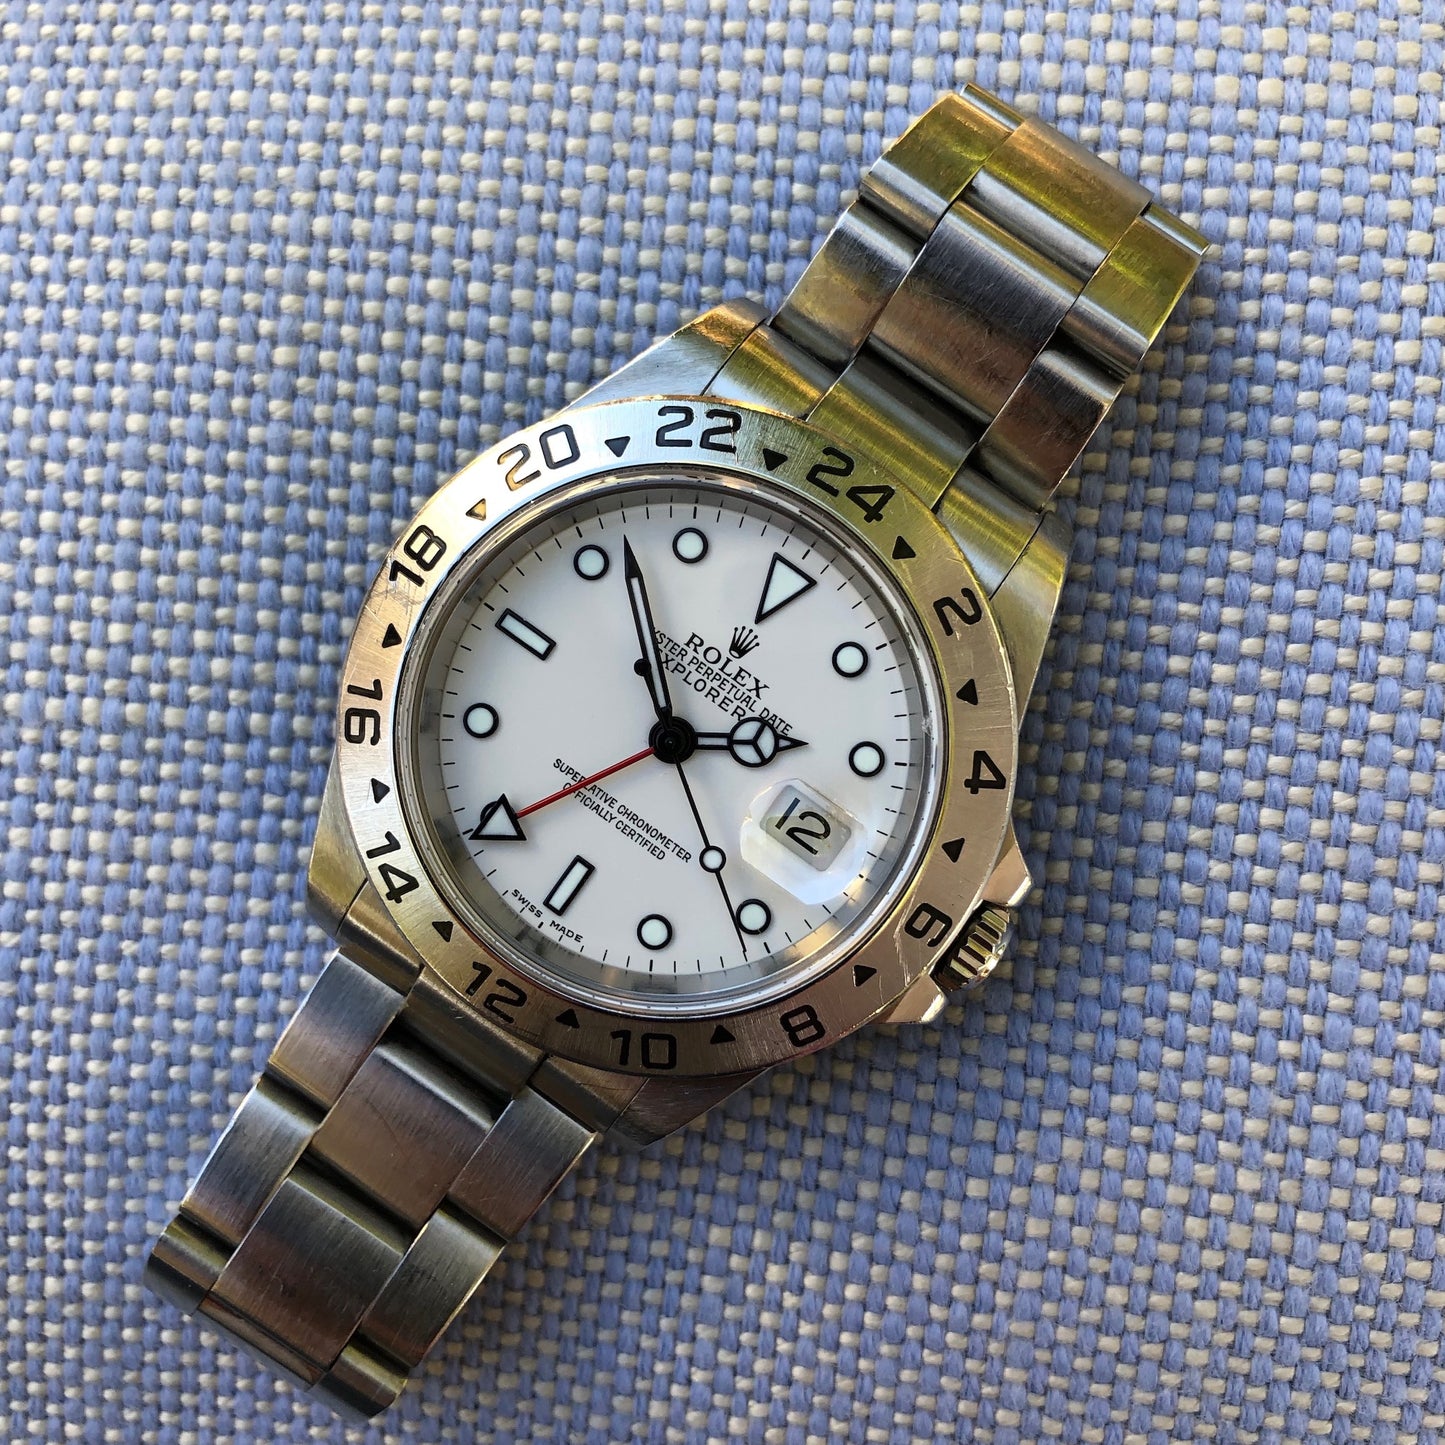 Rolex Explorer II 16570 White Stainless Steel GMT Oyster D Serial Wristwatch Circa 2005 - Hashtag Watch Company